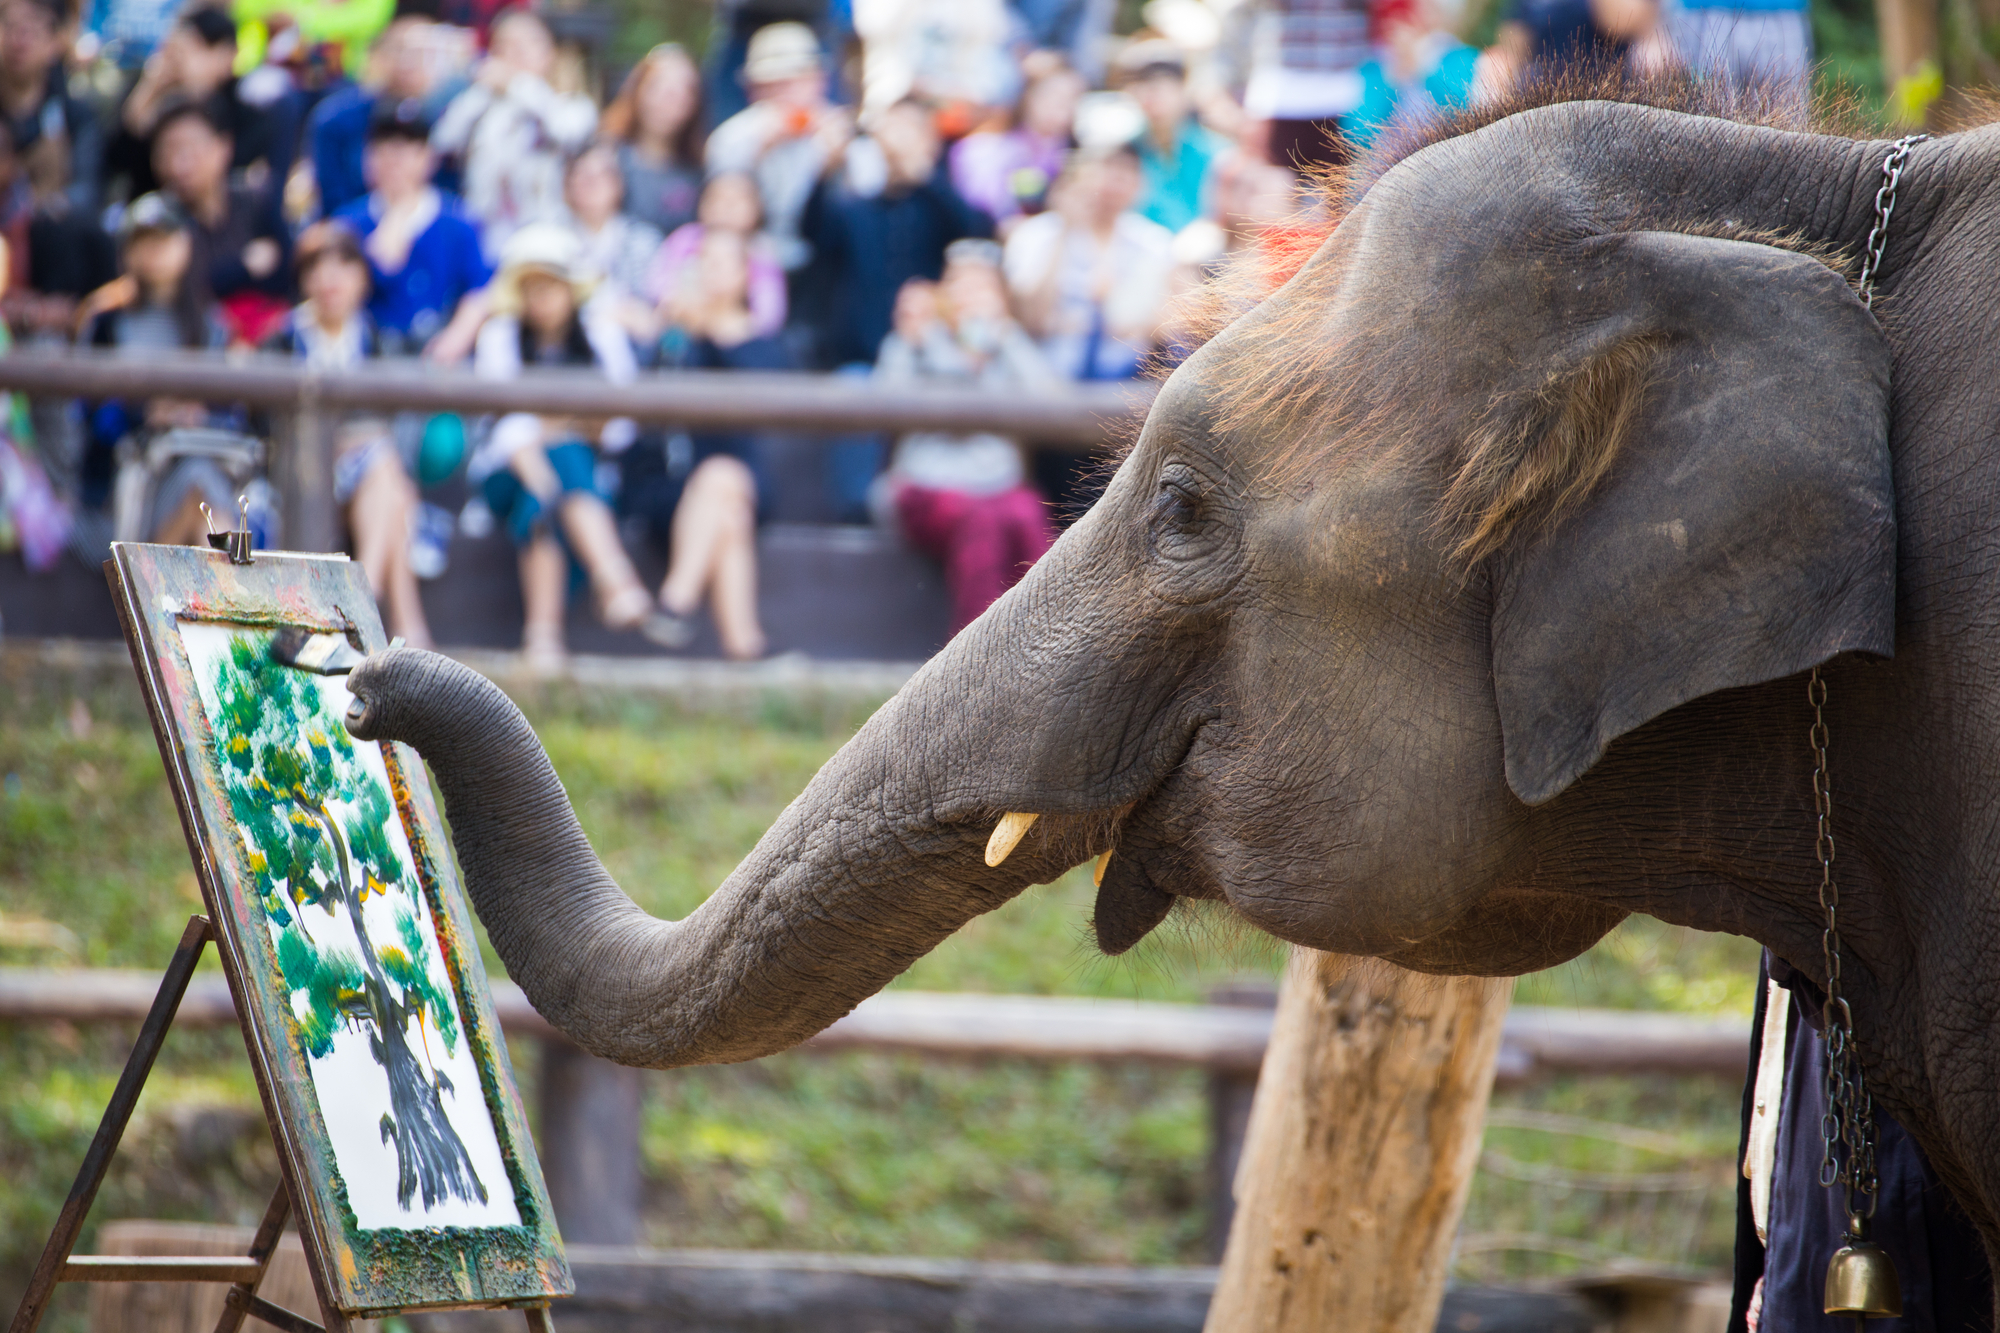 photograph of elephant at zoo painting